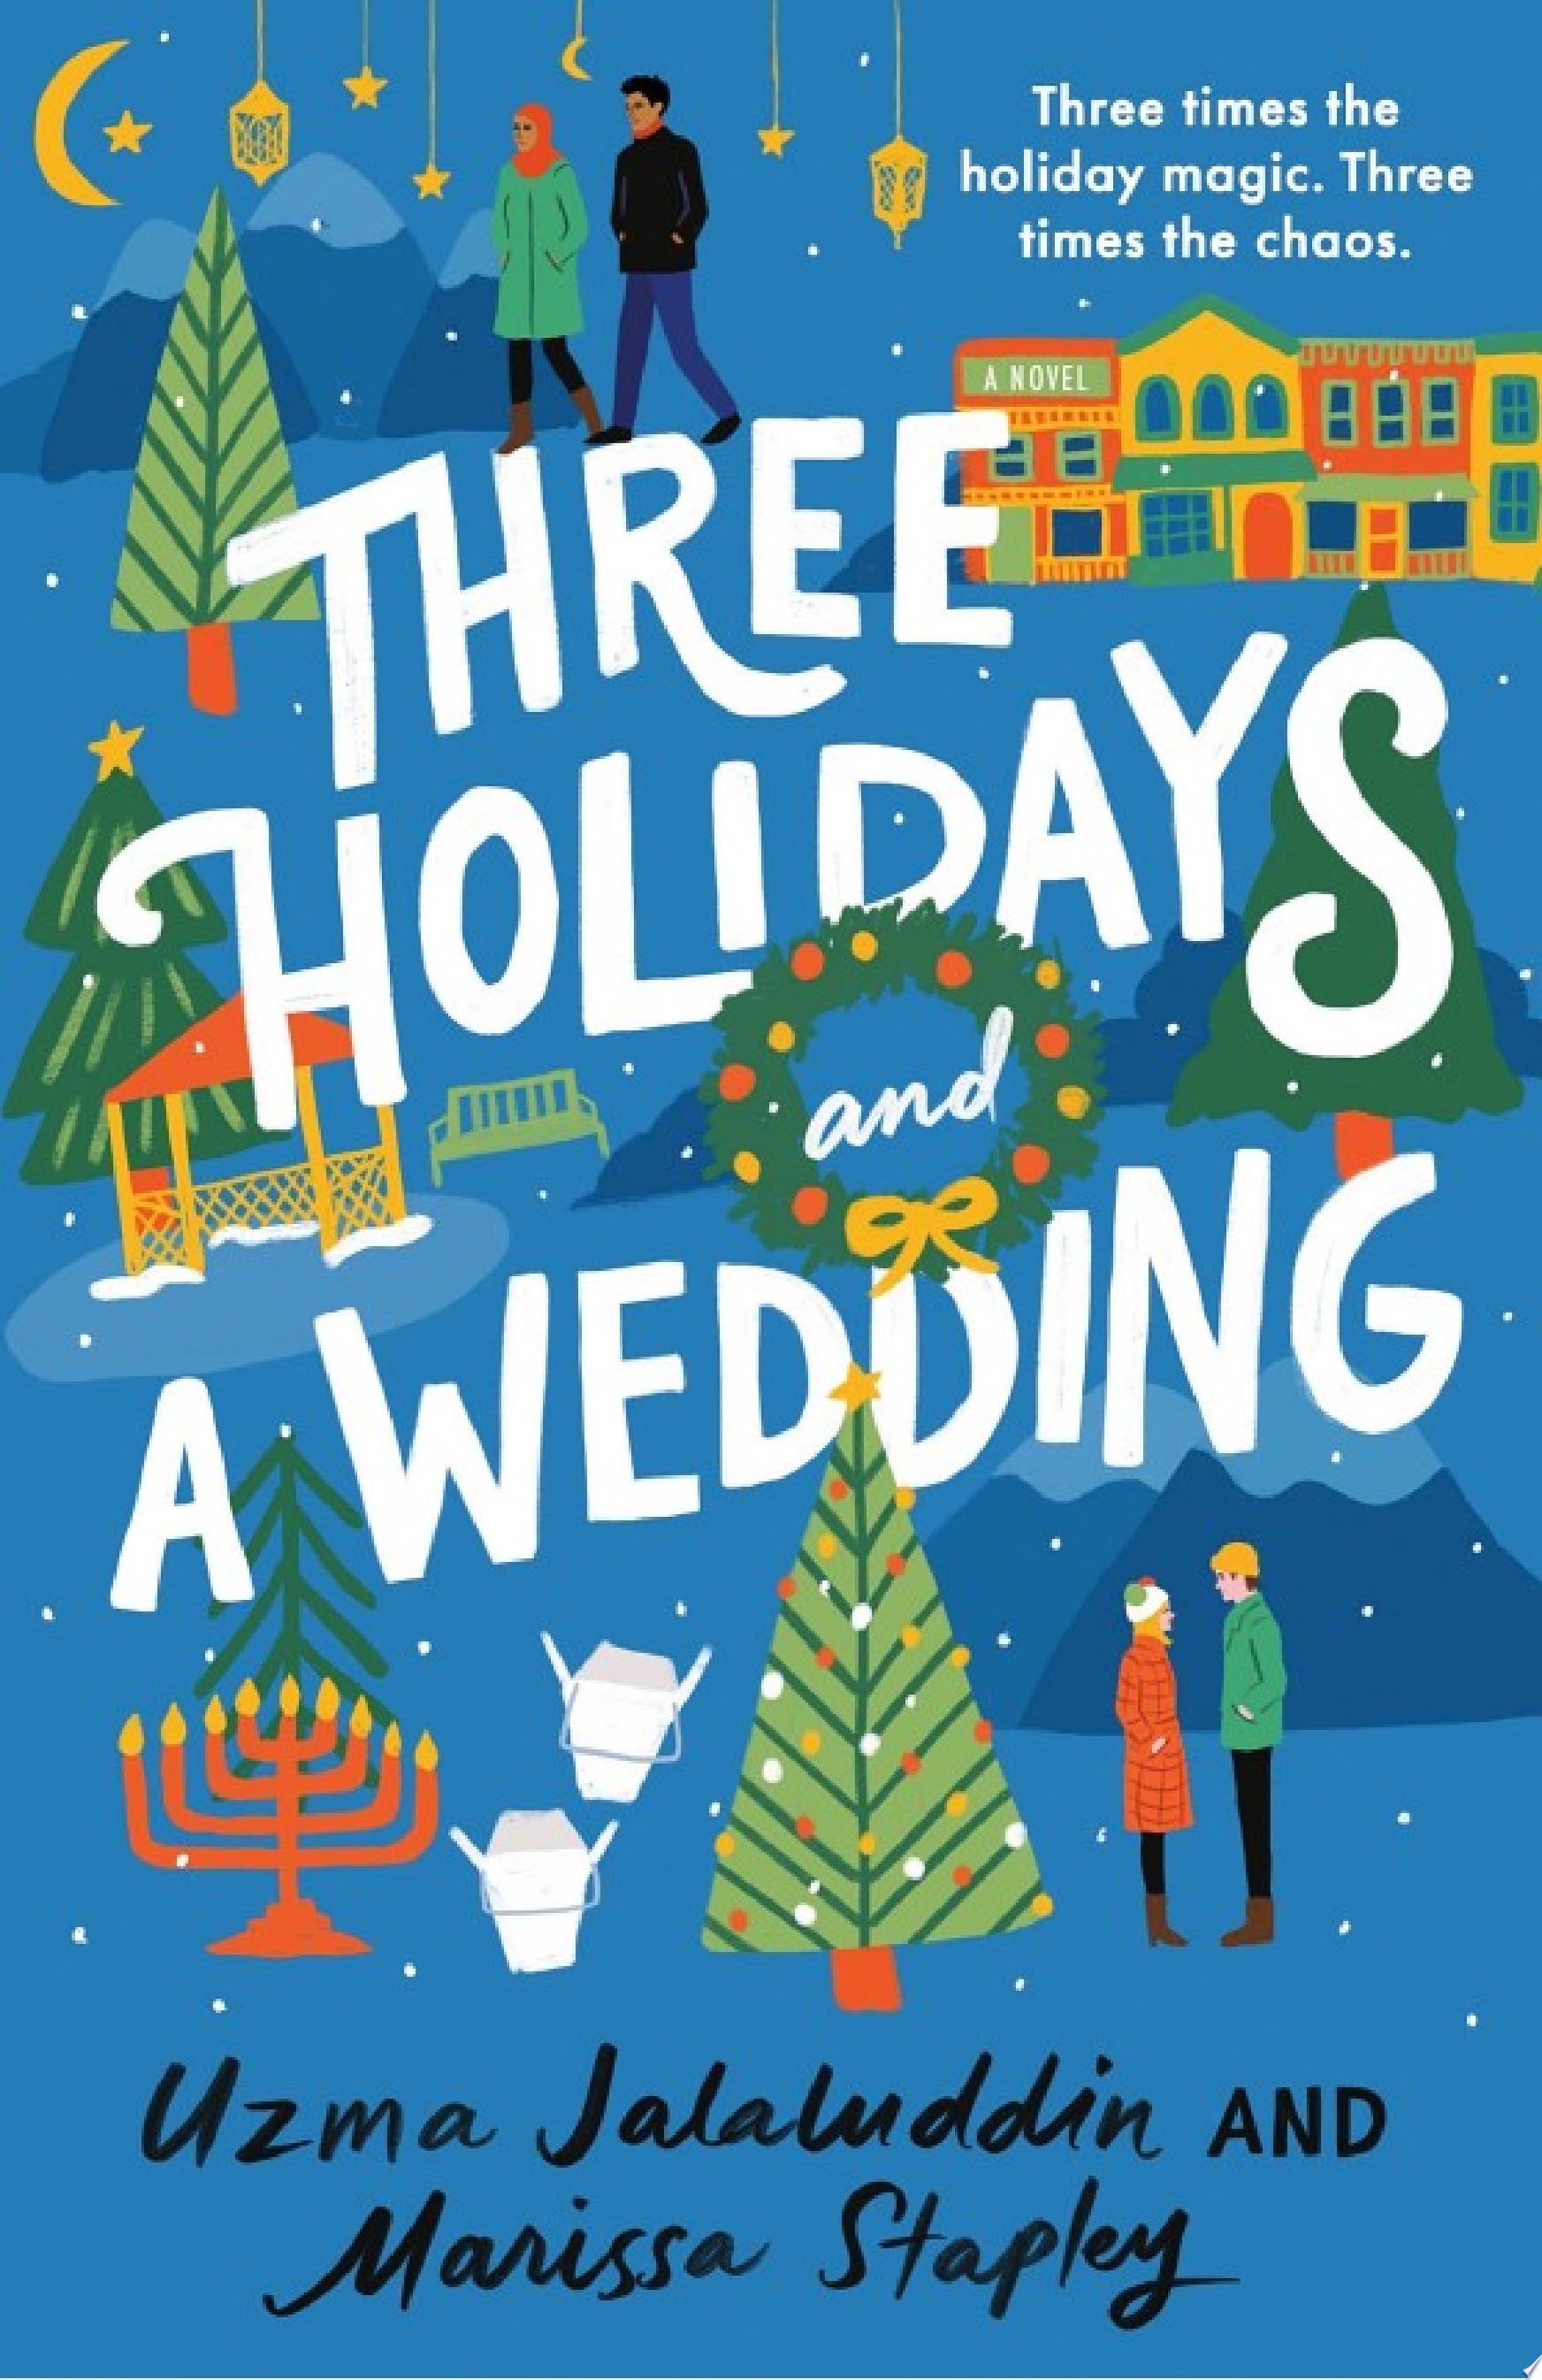 Image for "Three Holidays and a Wedding"